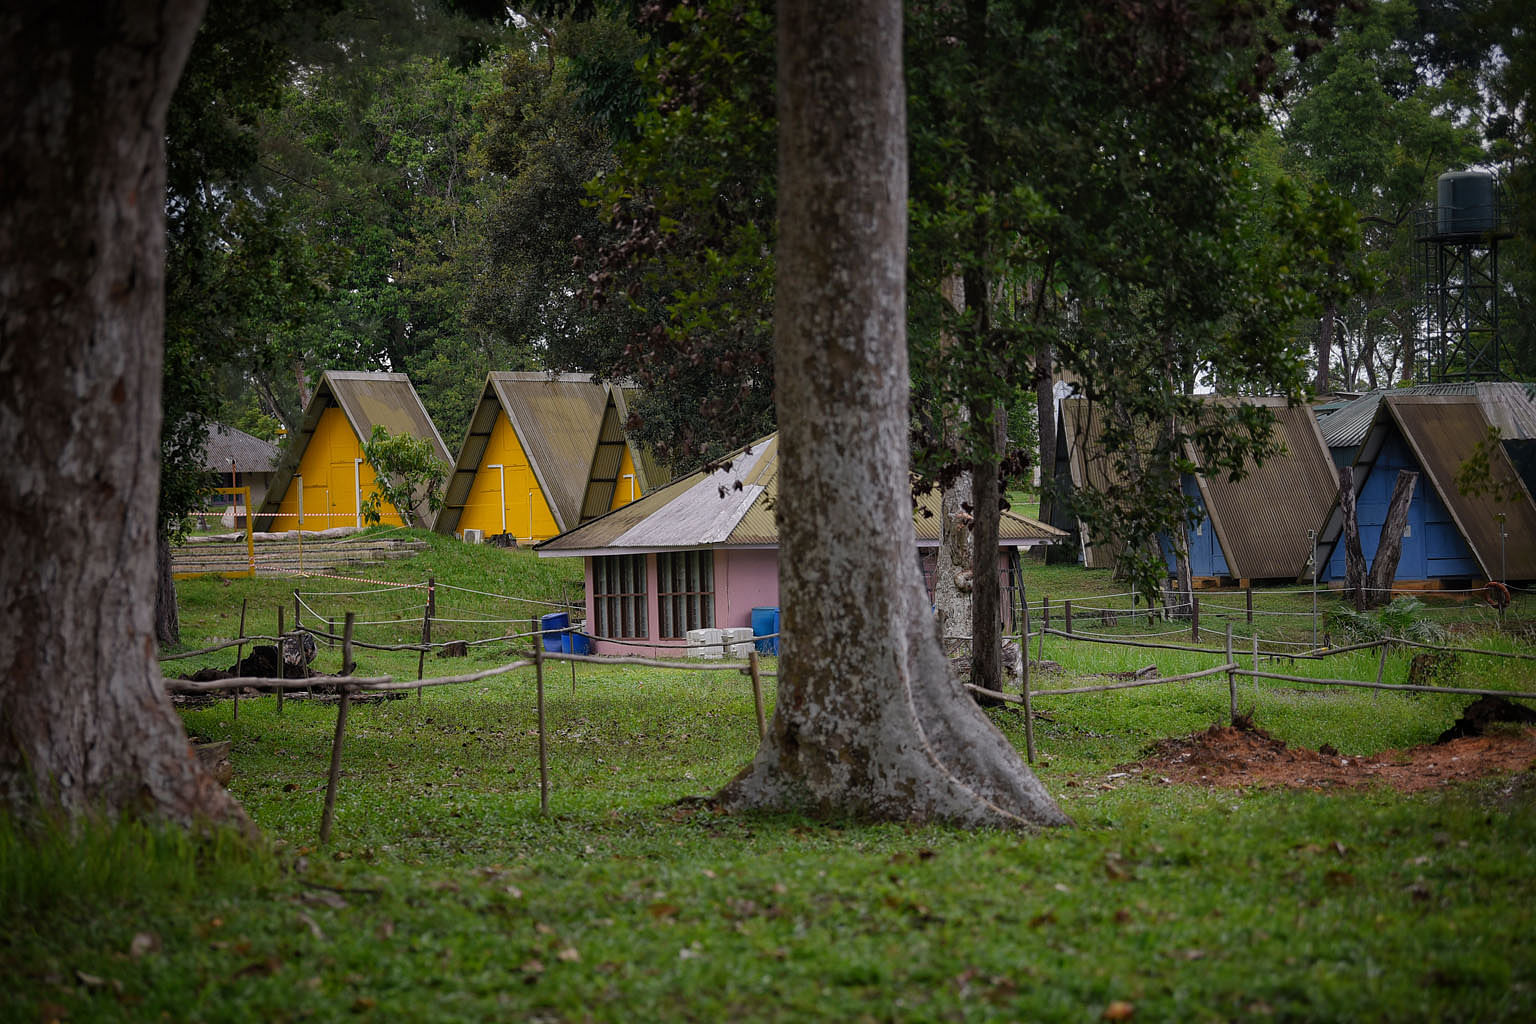 Sarimbun Scout Camp in Lim Chu Kang, one of the premises being used to house foreign workers. Marquees at Tanjong Pagar Terminal on Wednesday. A large facility is being set up that could house up to 15,000 Covid-19 patients or foreign workers, as the